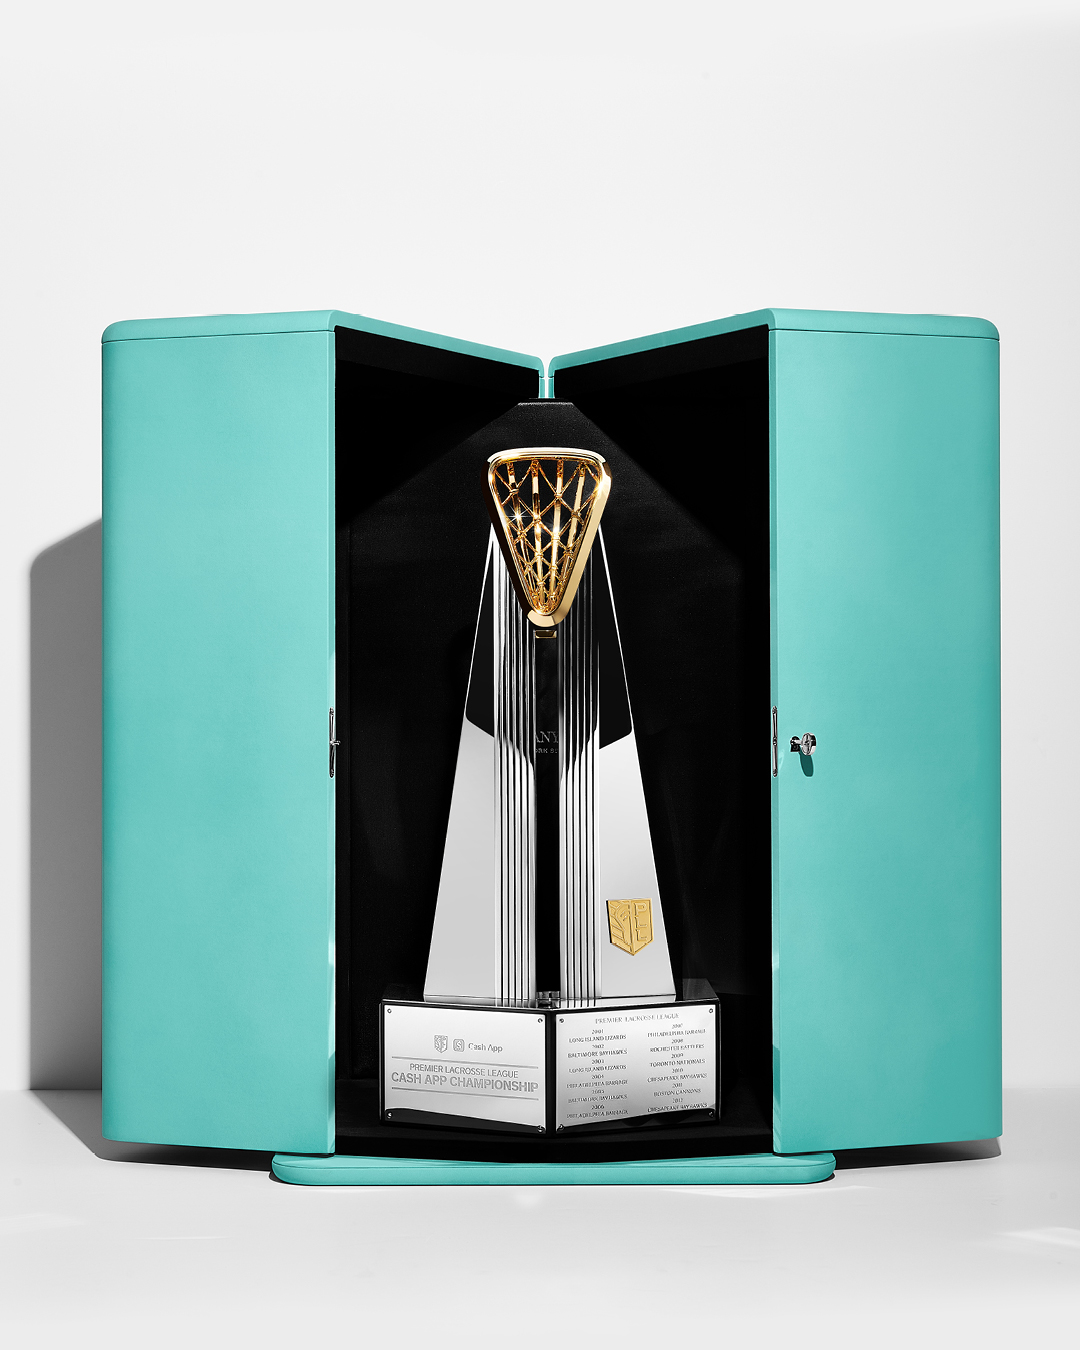 Tiffany & Co. on X: Continuing our 160-year legacy of trophy  craftsmanship, Tiffany & Co. has created the Premier Lacrosse League  (PLL) Cash App Championship Trophy. Our expert silversmiths created the  illusion